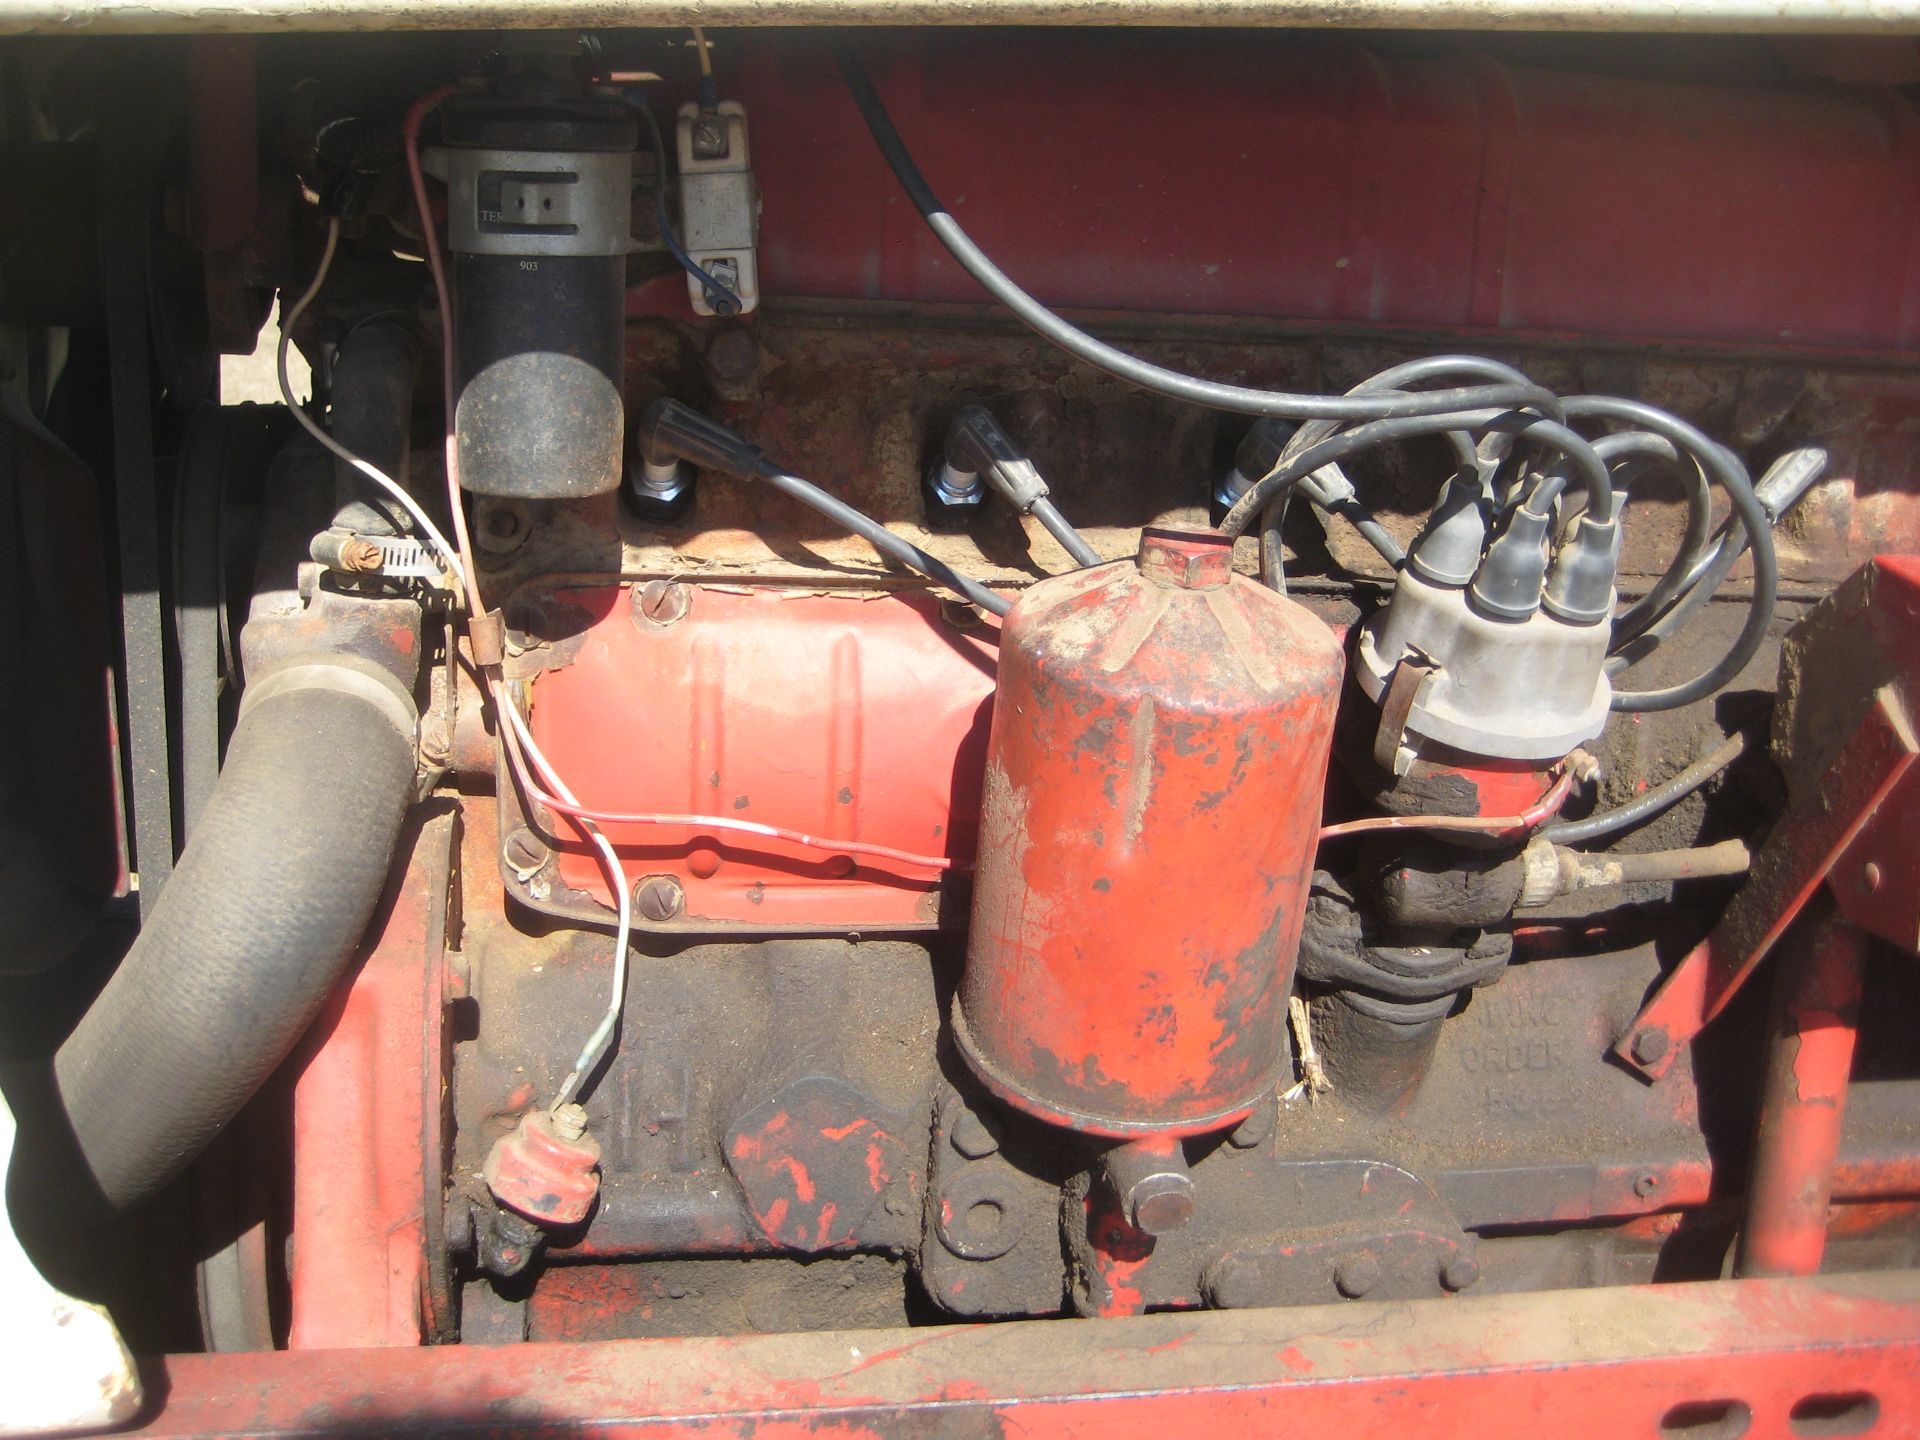 FARMALL 656, GAS, USED LITTLE LAST FEW YEARS, NO KNOWN PROBLEMS, 15.5x 38 Tires, SN-24032 - Image 14 of 18